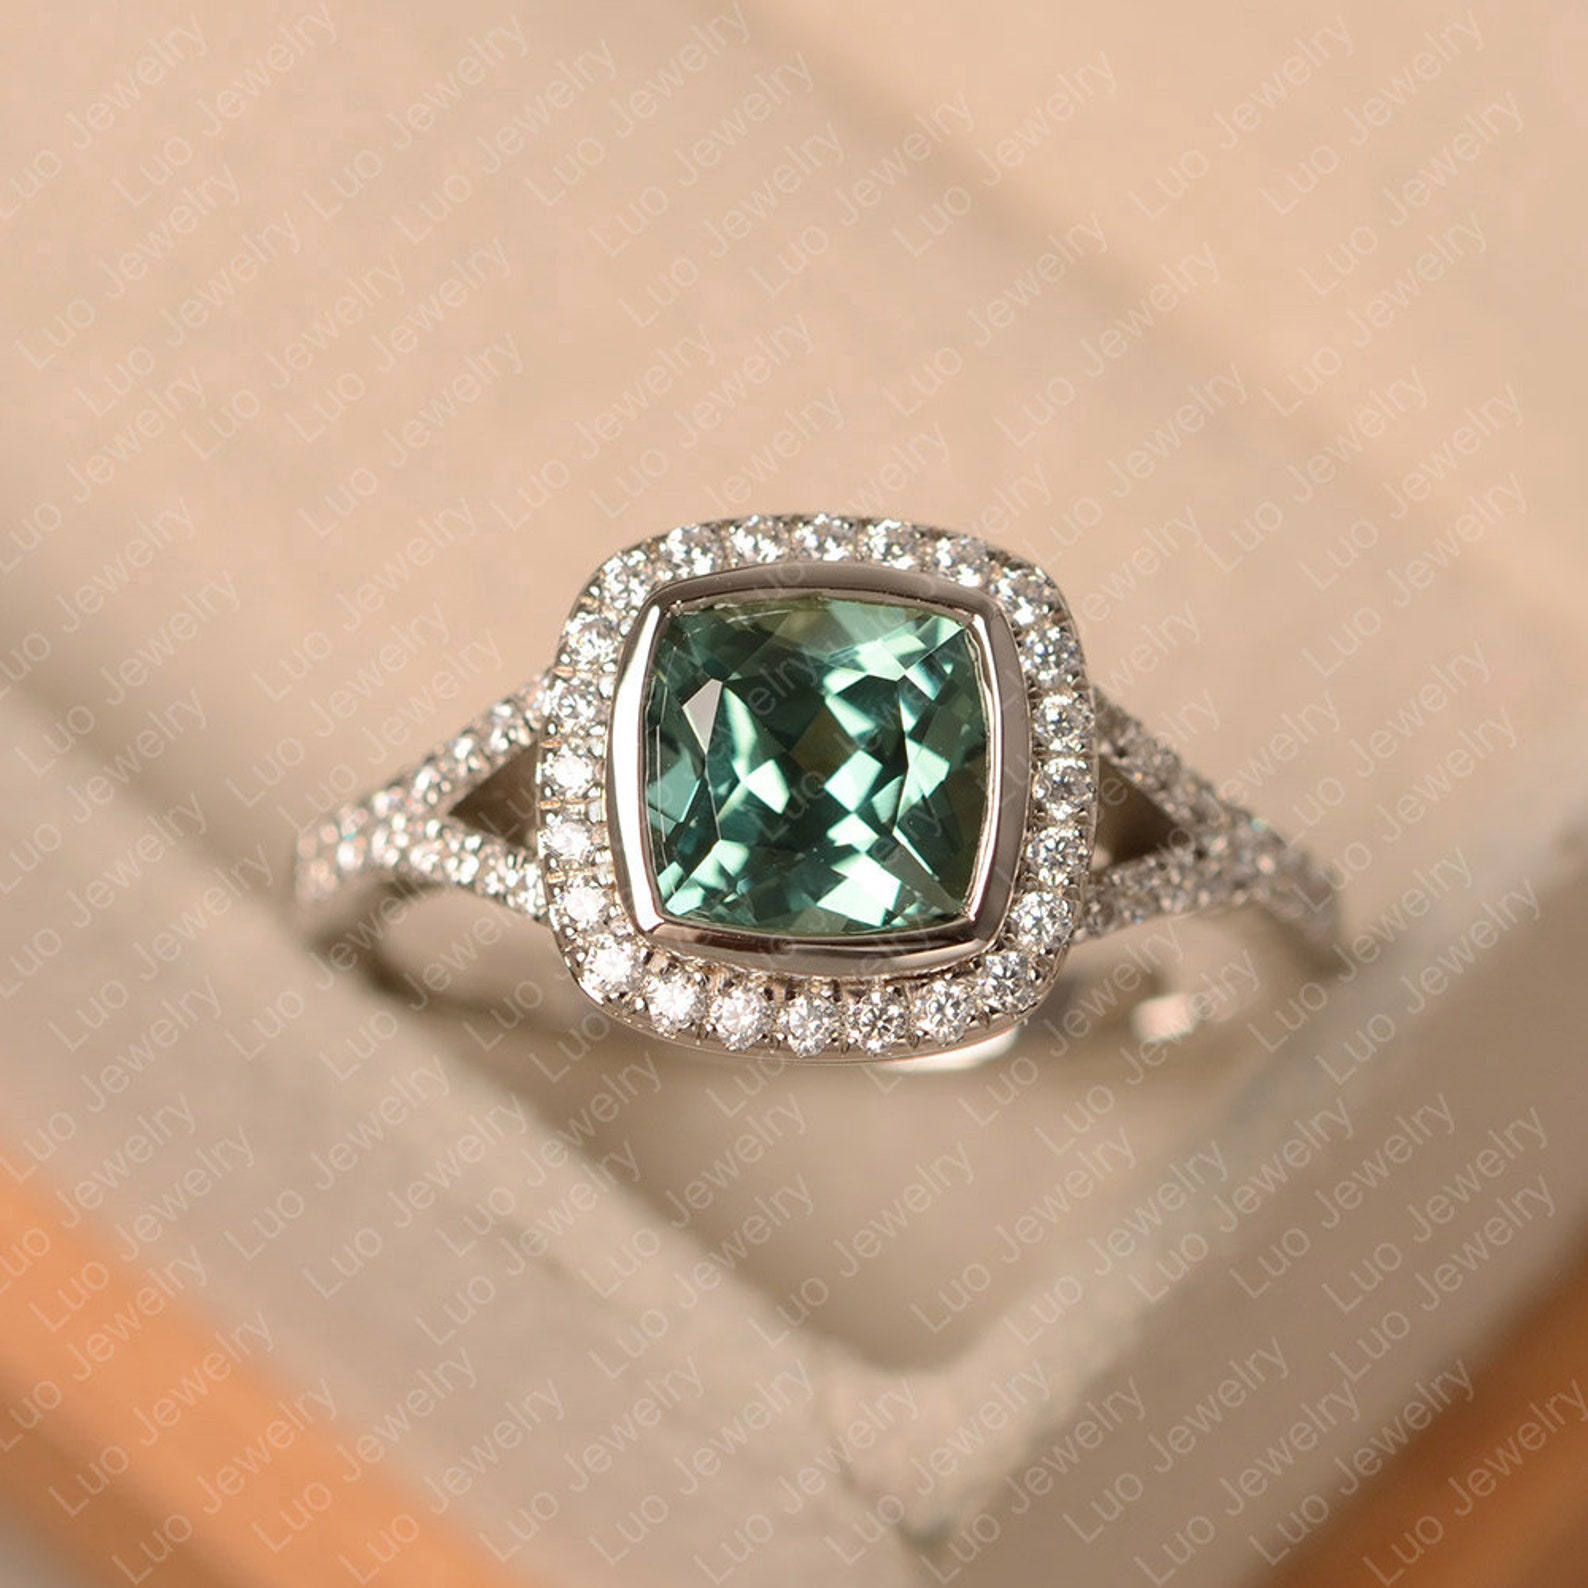 Green Sapphire Ring Cushion Cut Green Stone Ring Sterling - Etsy